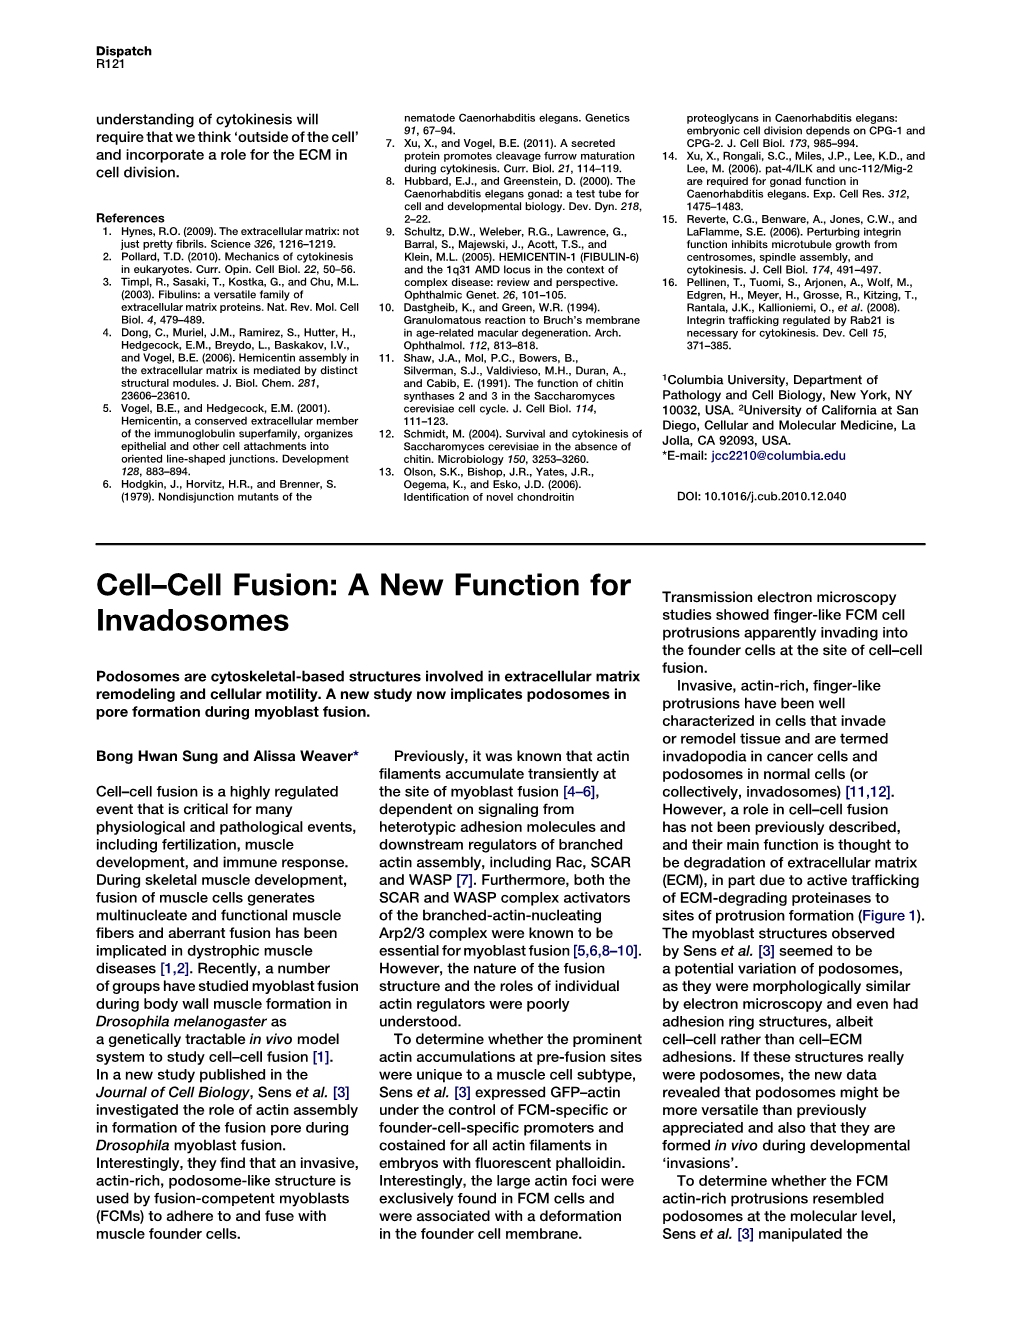 Cell-Cell Fusion: a New Function for Invadosomes